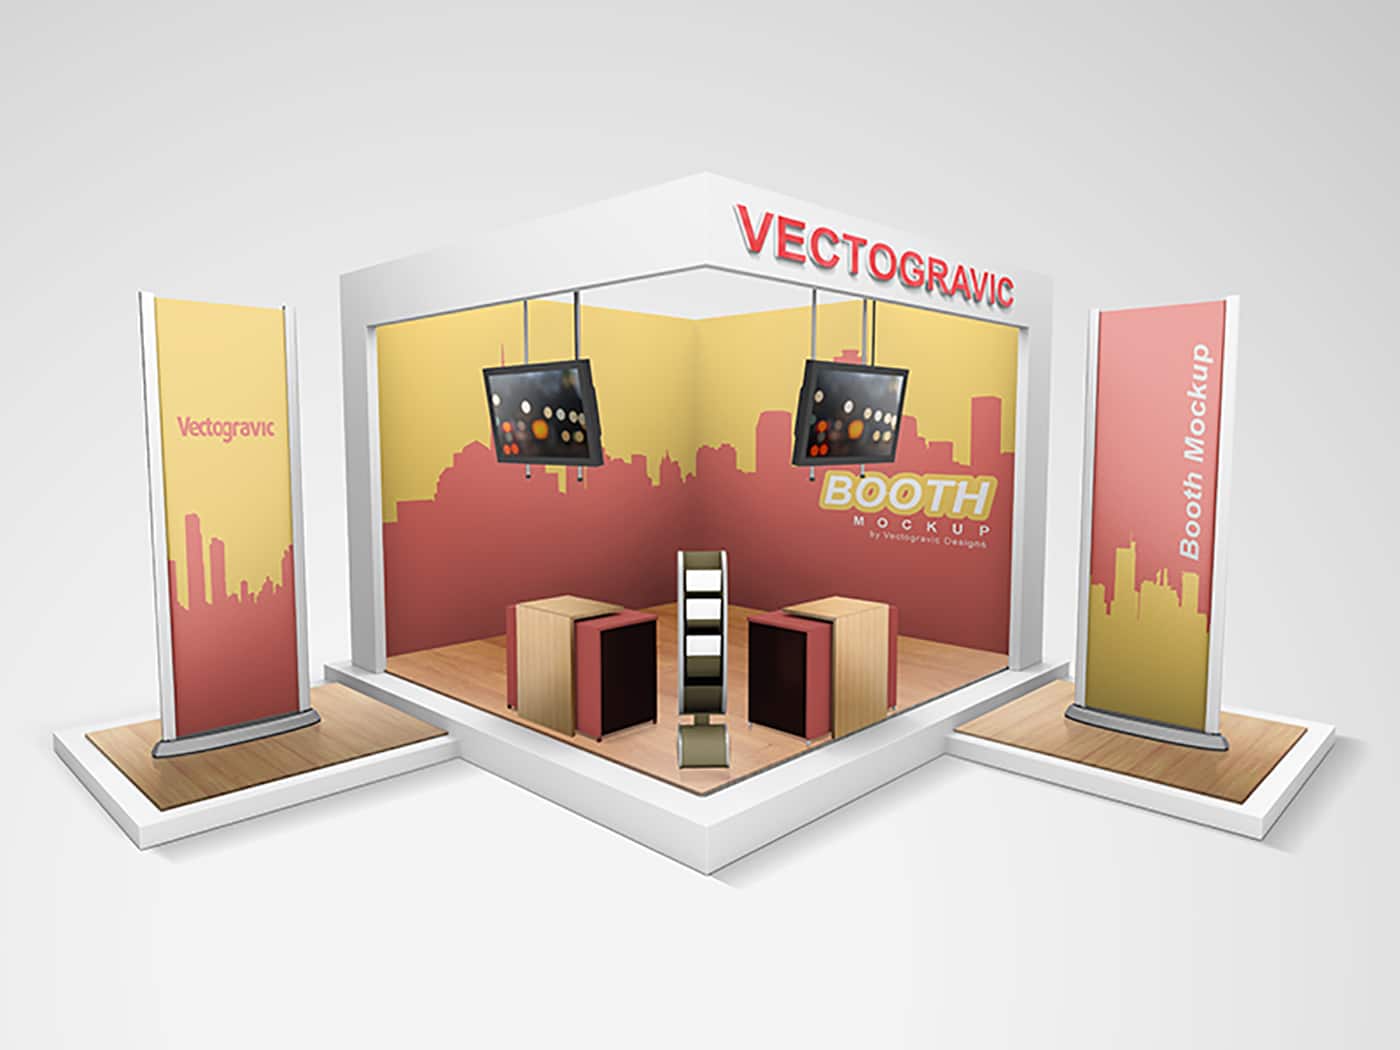 Technical Display Booth